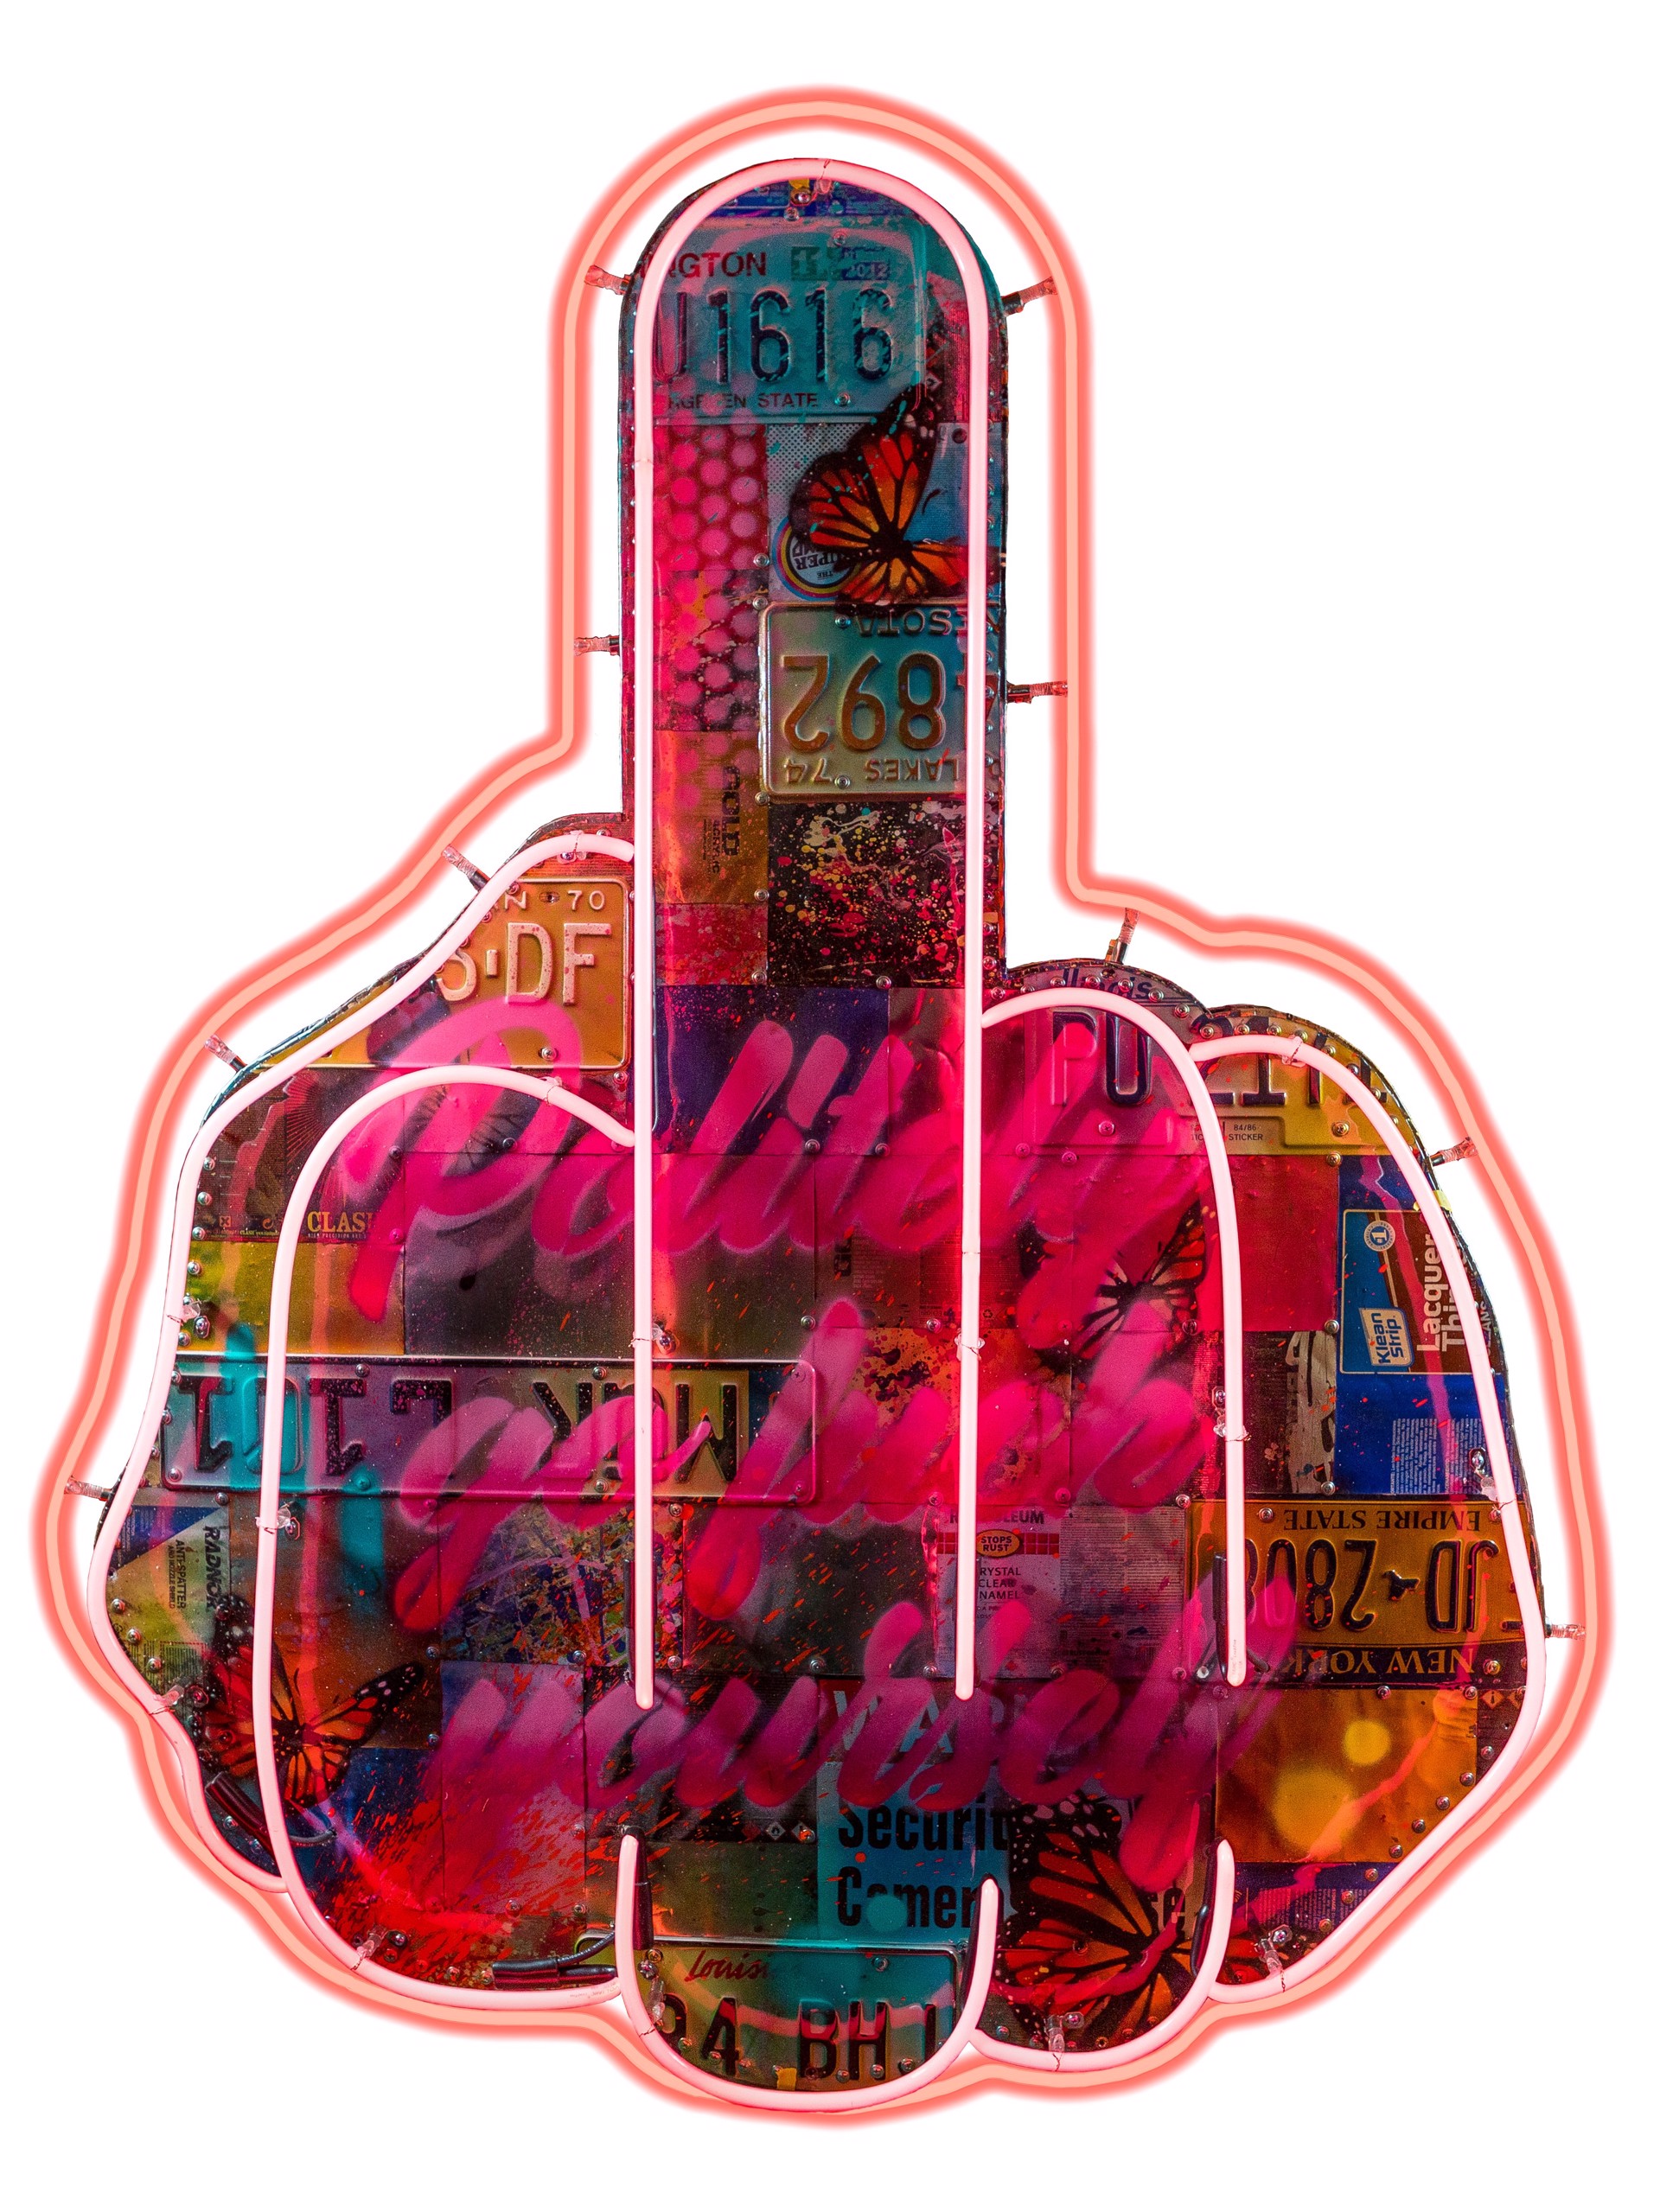 PGFY Finger’ Double-Sided Neon by Risk